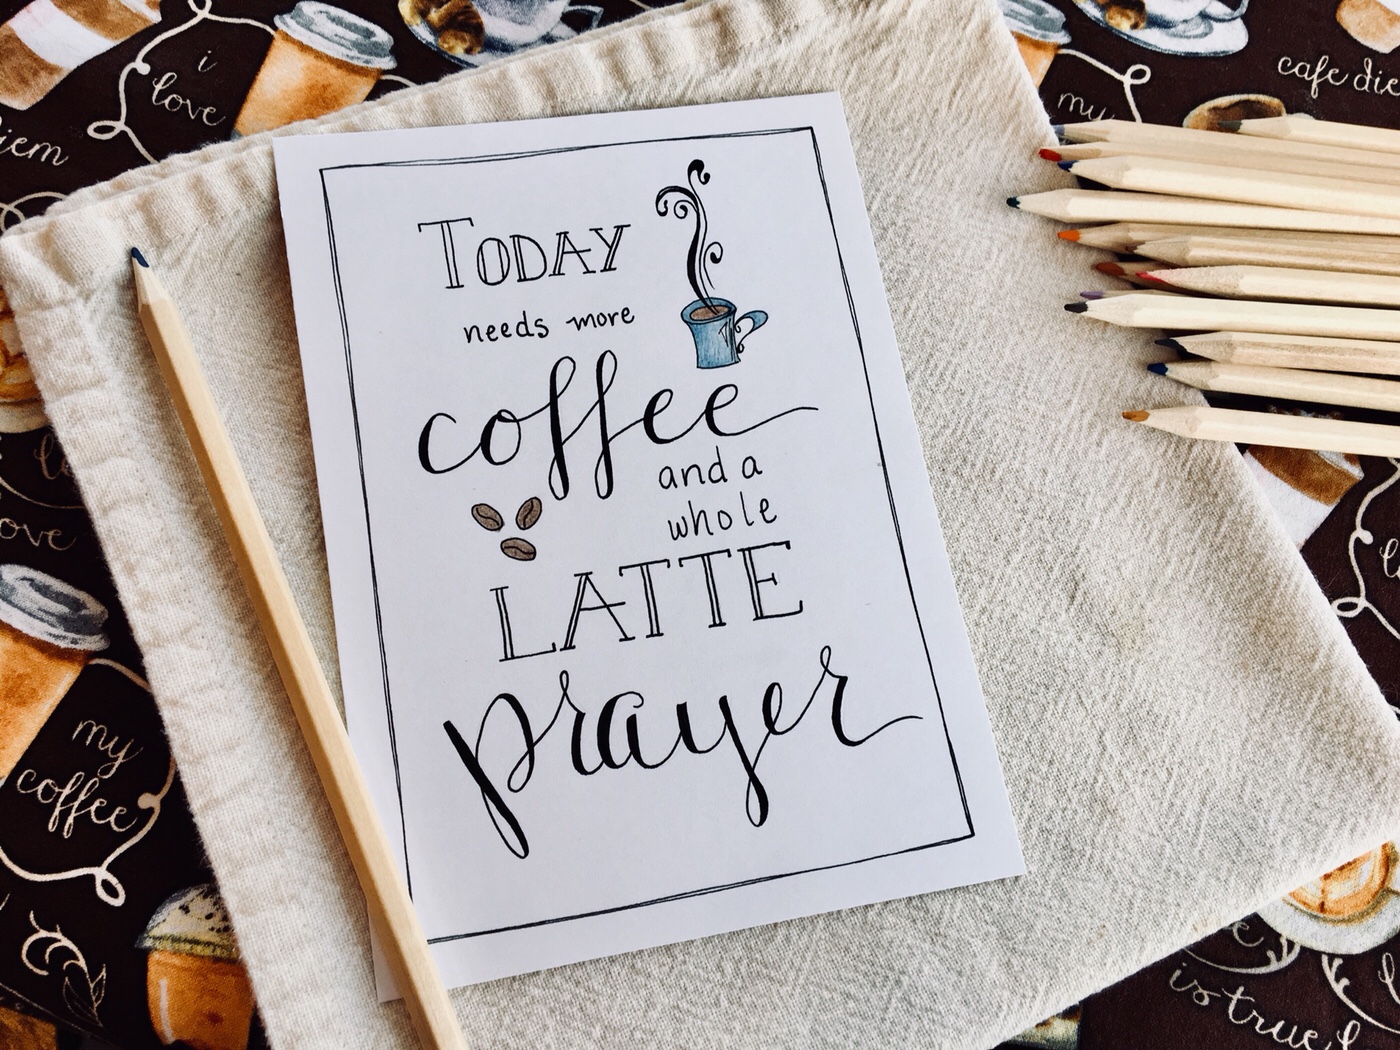 "Today needs more coffee and a whole latte prayer" hand lettered illustration